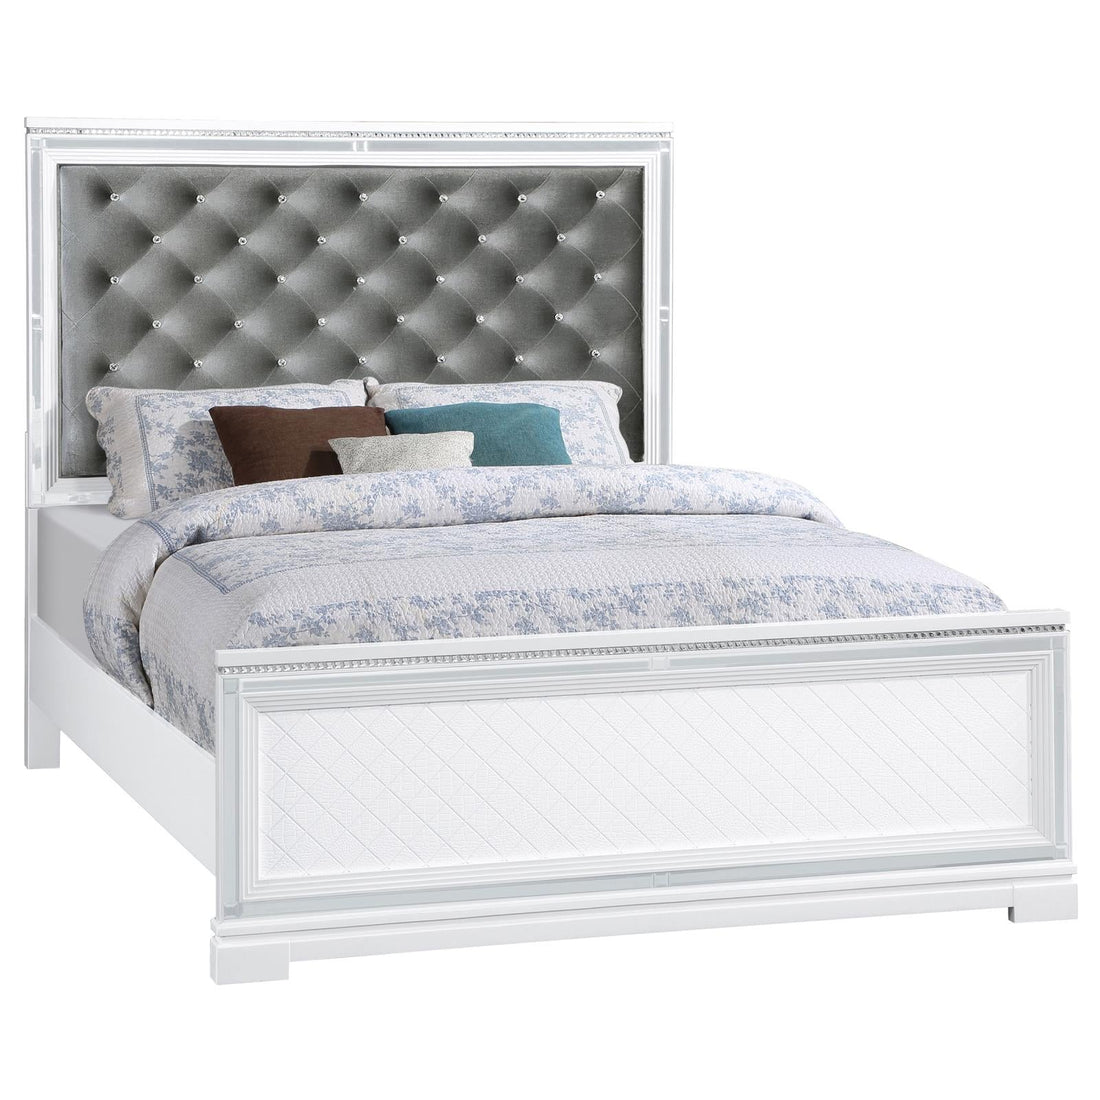 Eleanor Upholstered Tufted Bed White - 223561Q - Bien Home Furniture &amp; Electronics